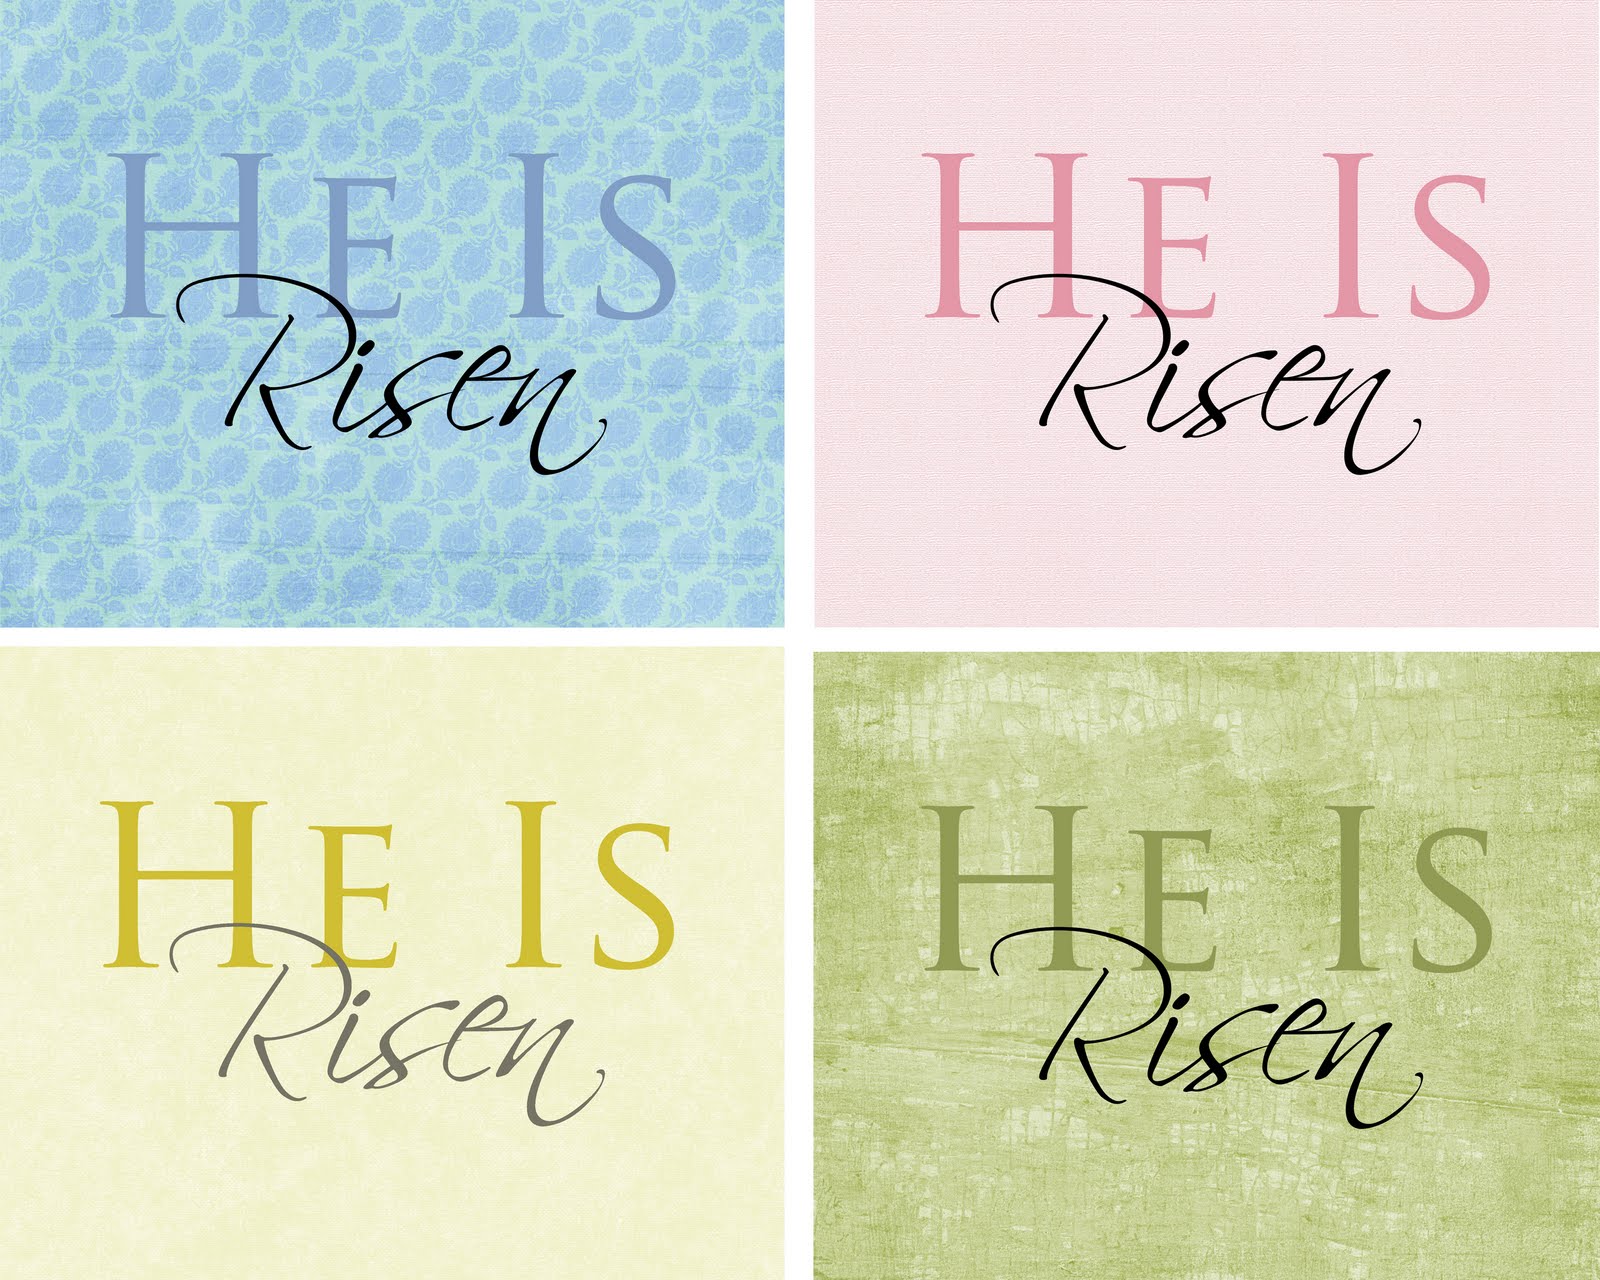 cross-deluxe-foil-diecut-religious-easter-cards-current-catalog